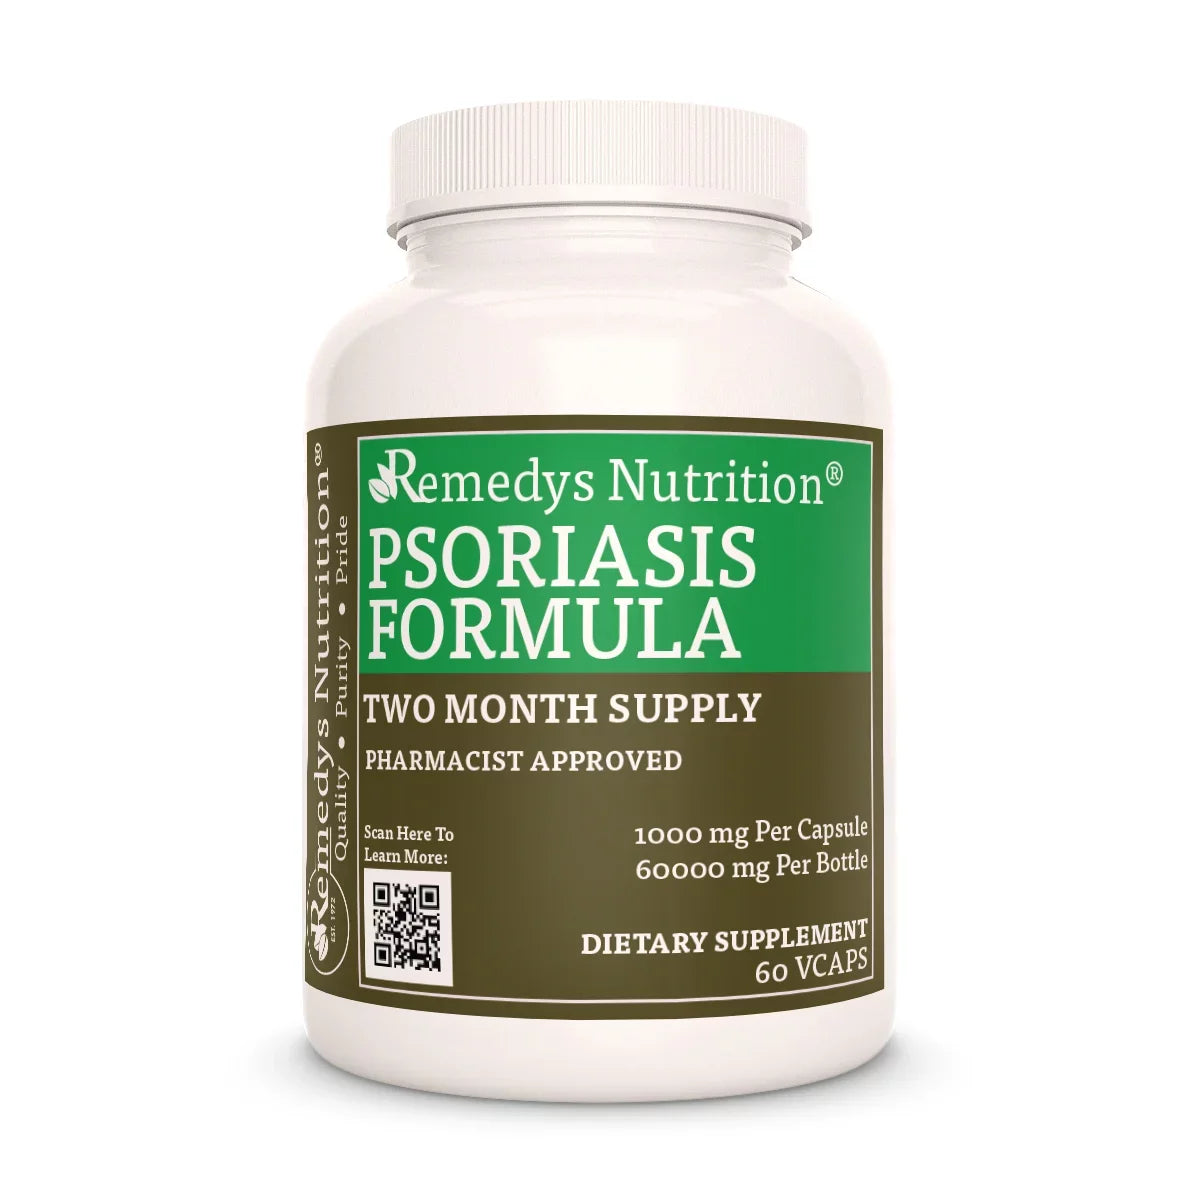 Image of Remedy's Nutrition® Psoriasis Formula™ Capsules Herbal Dietary Supplement bottle. Made in USA. Dandelion & Burdock. 